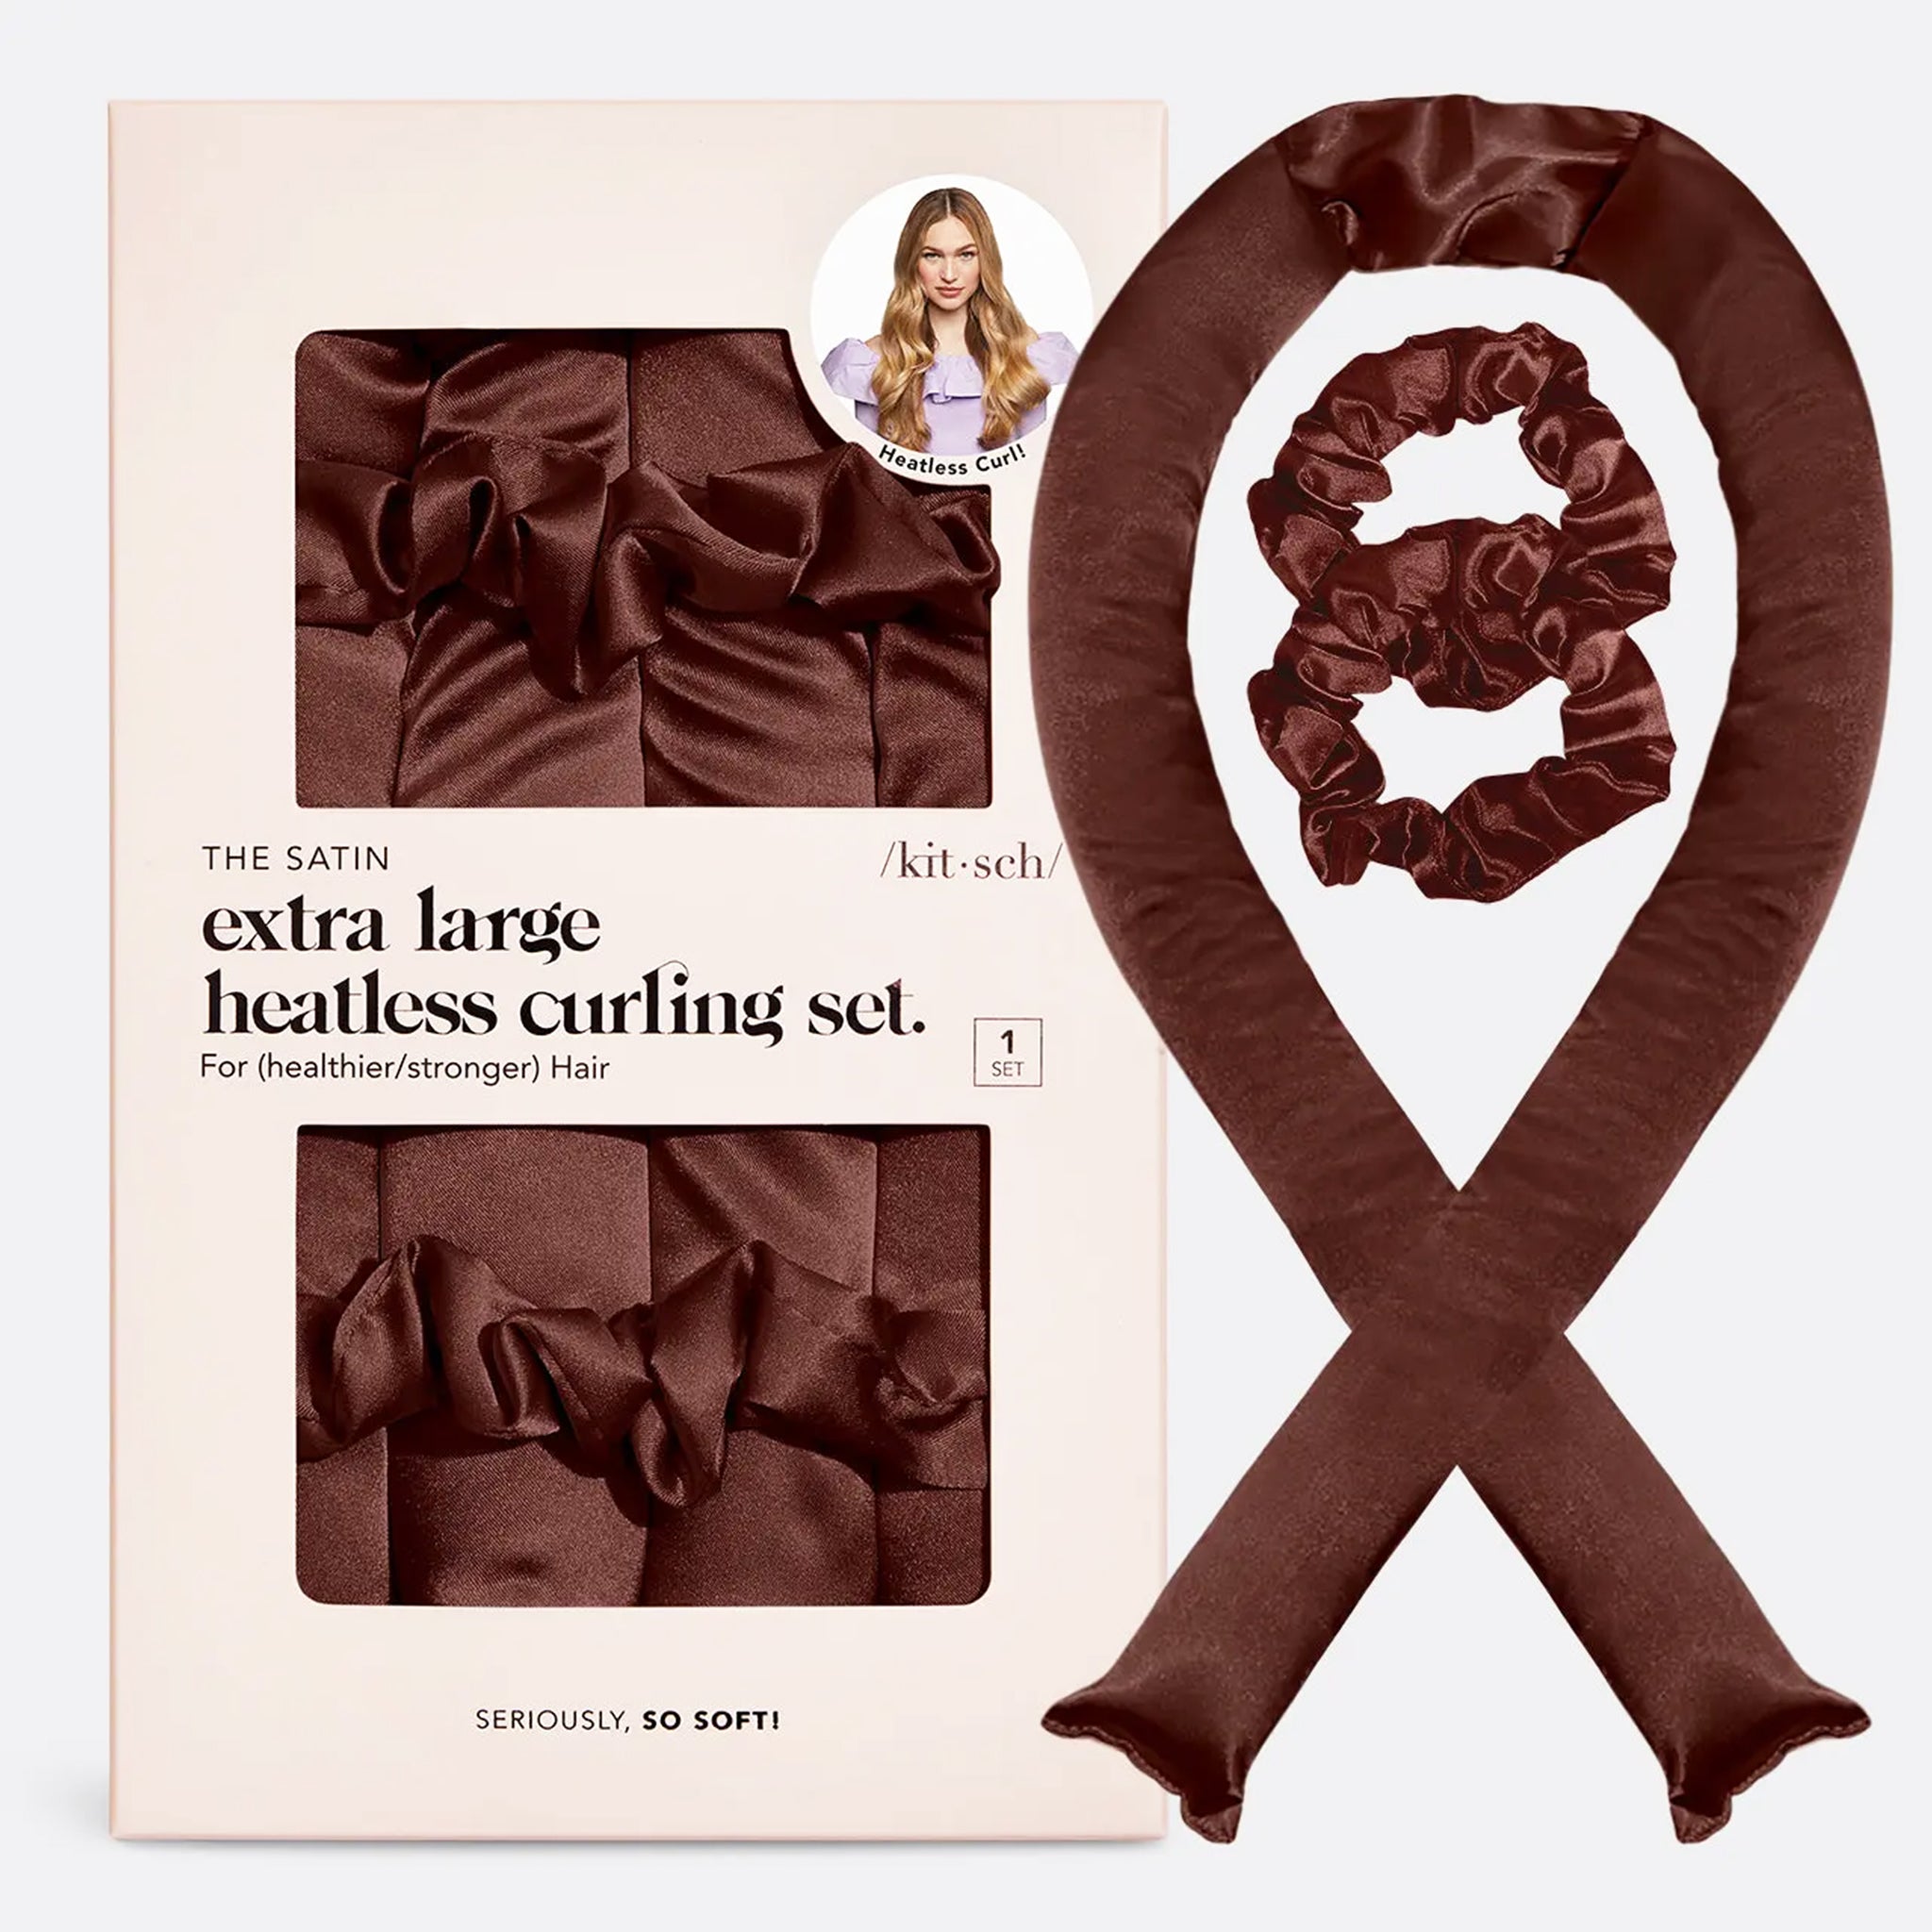 A chocolate brown satin curling set and the packaging it comes in. 